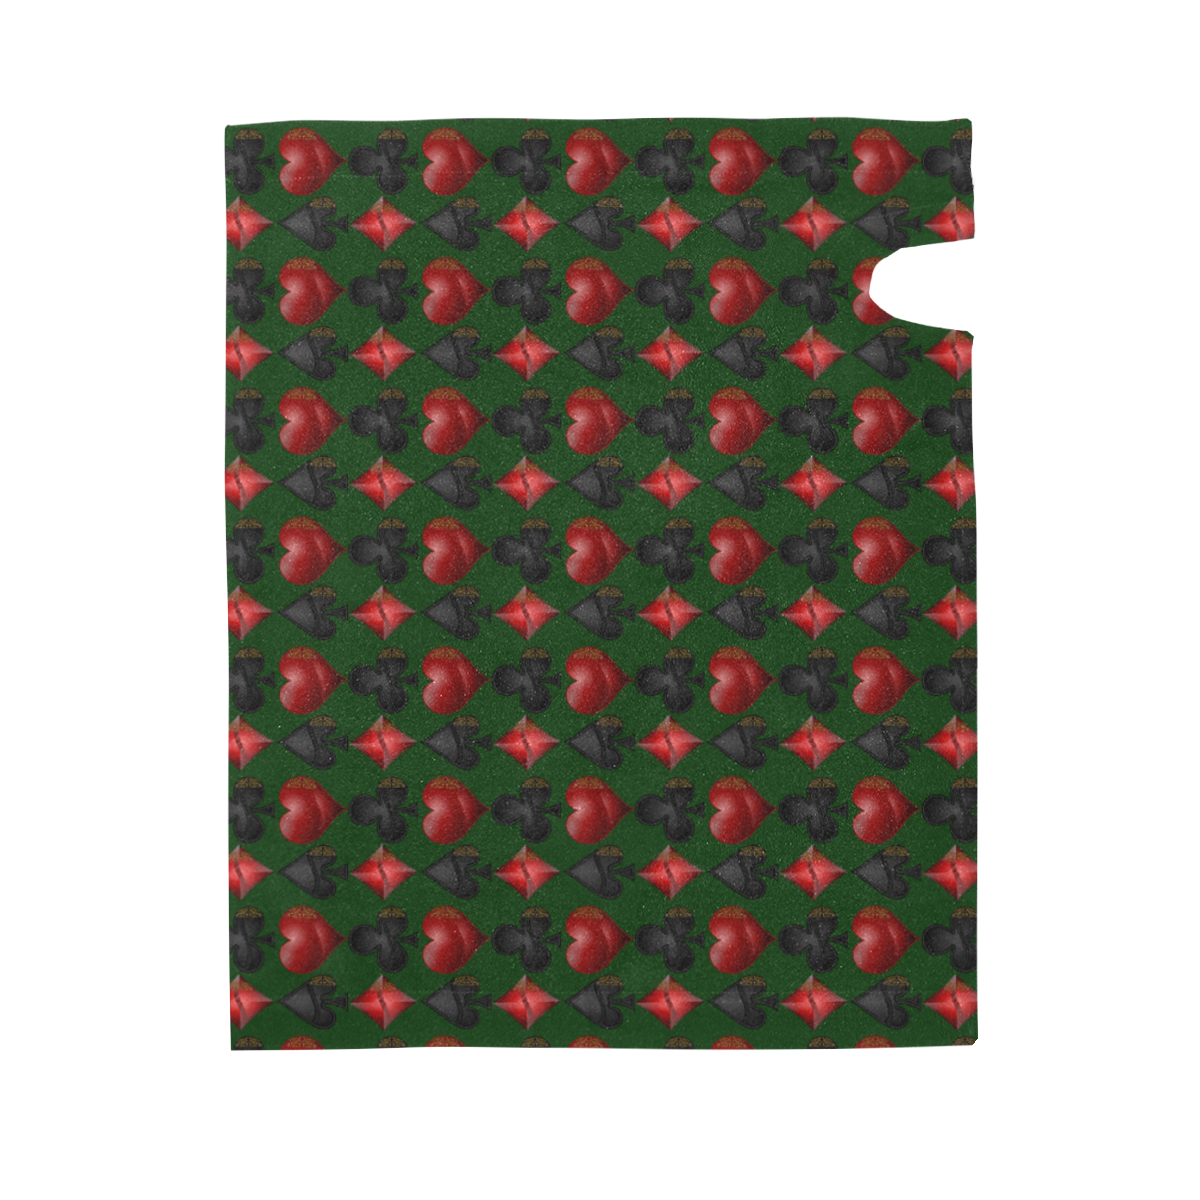 Las Vegas Black and Red Casino Poker Card Shapes on Green Mailbox Cover